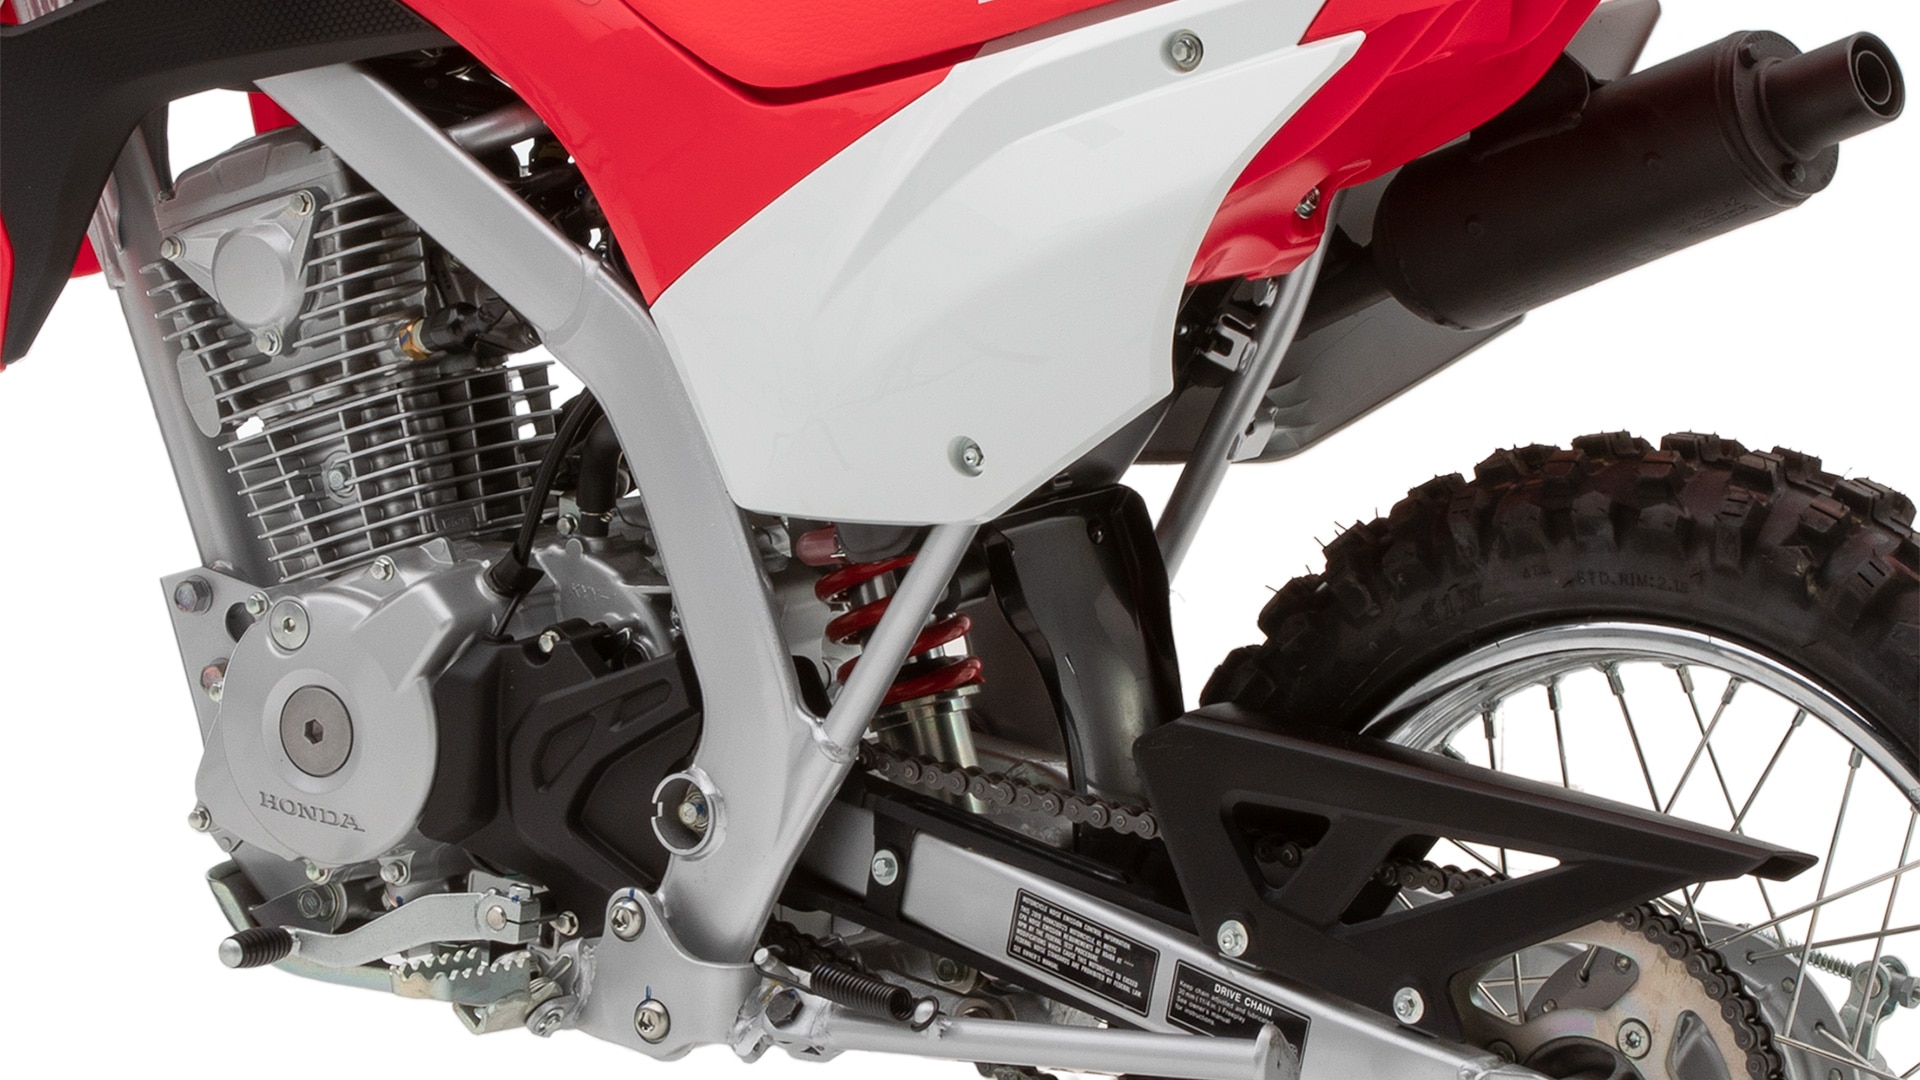 Close-up of CRF125FB rear fairing, frame and 4-stroke engine.